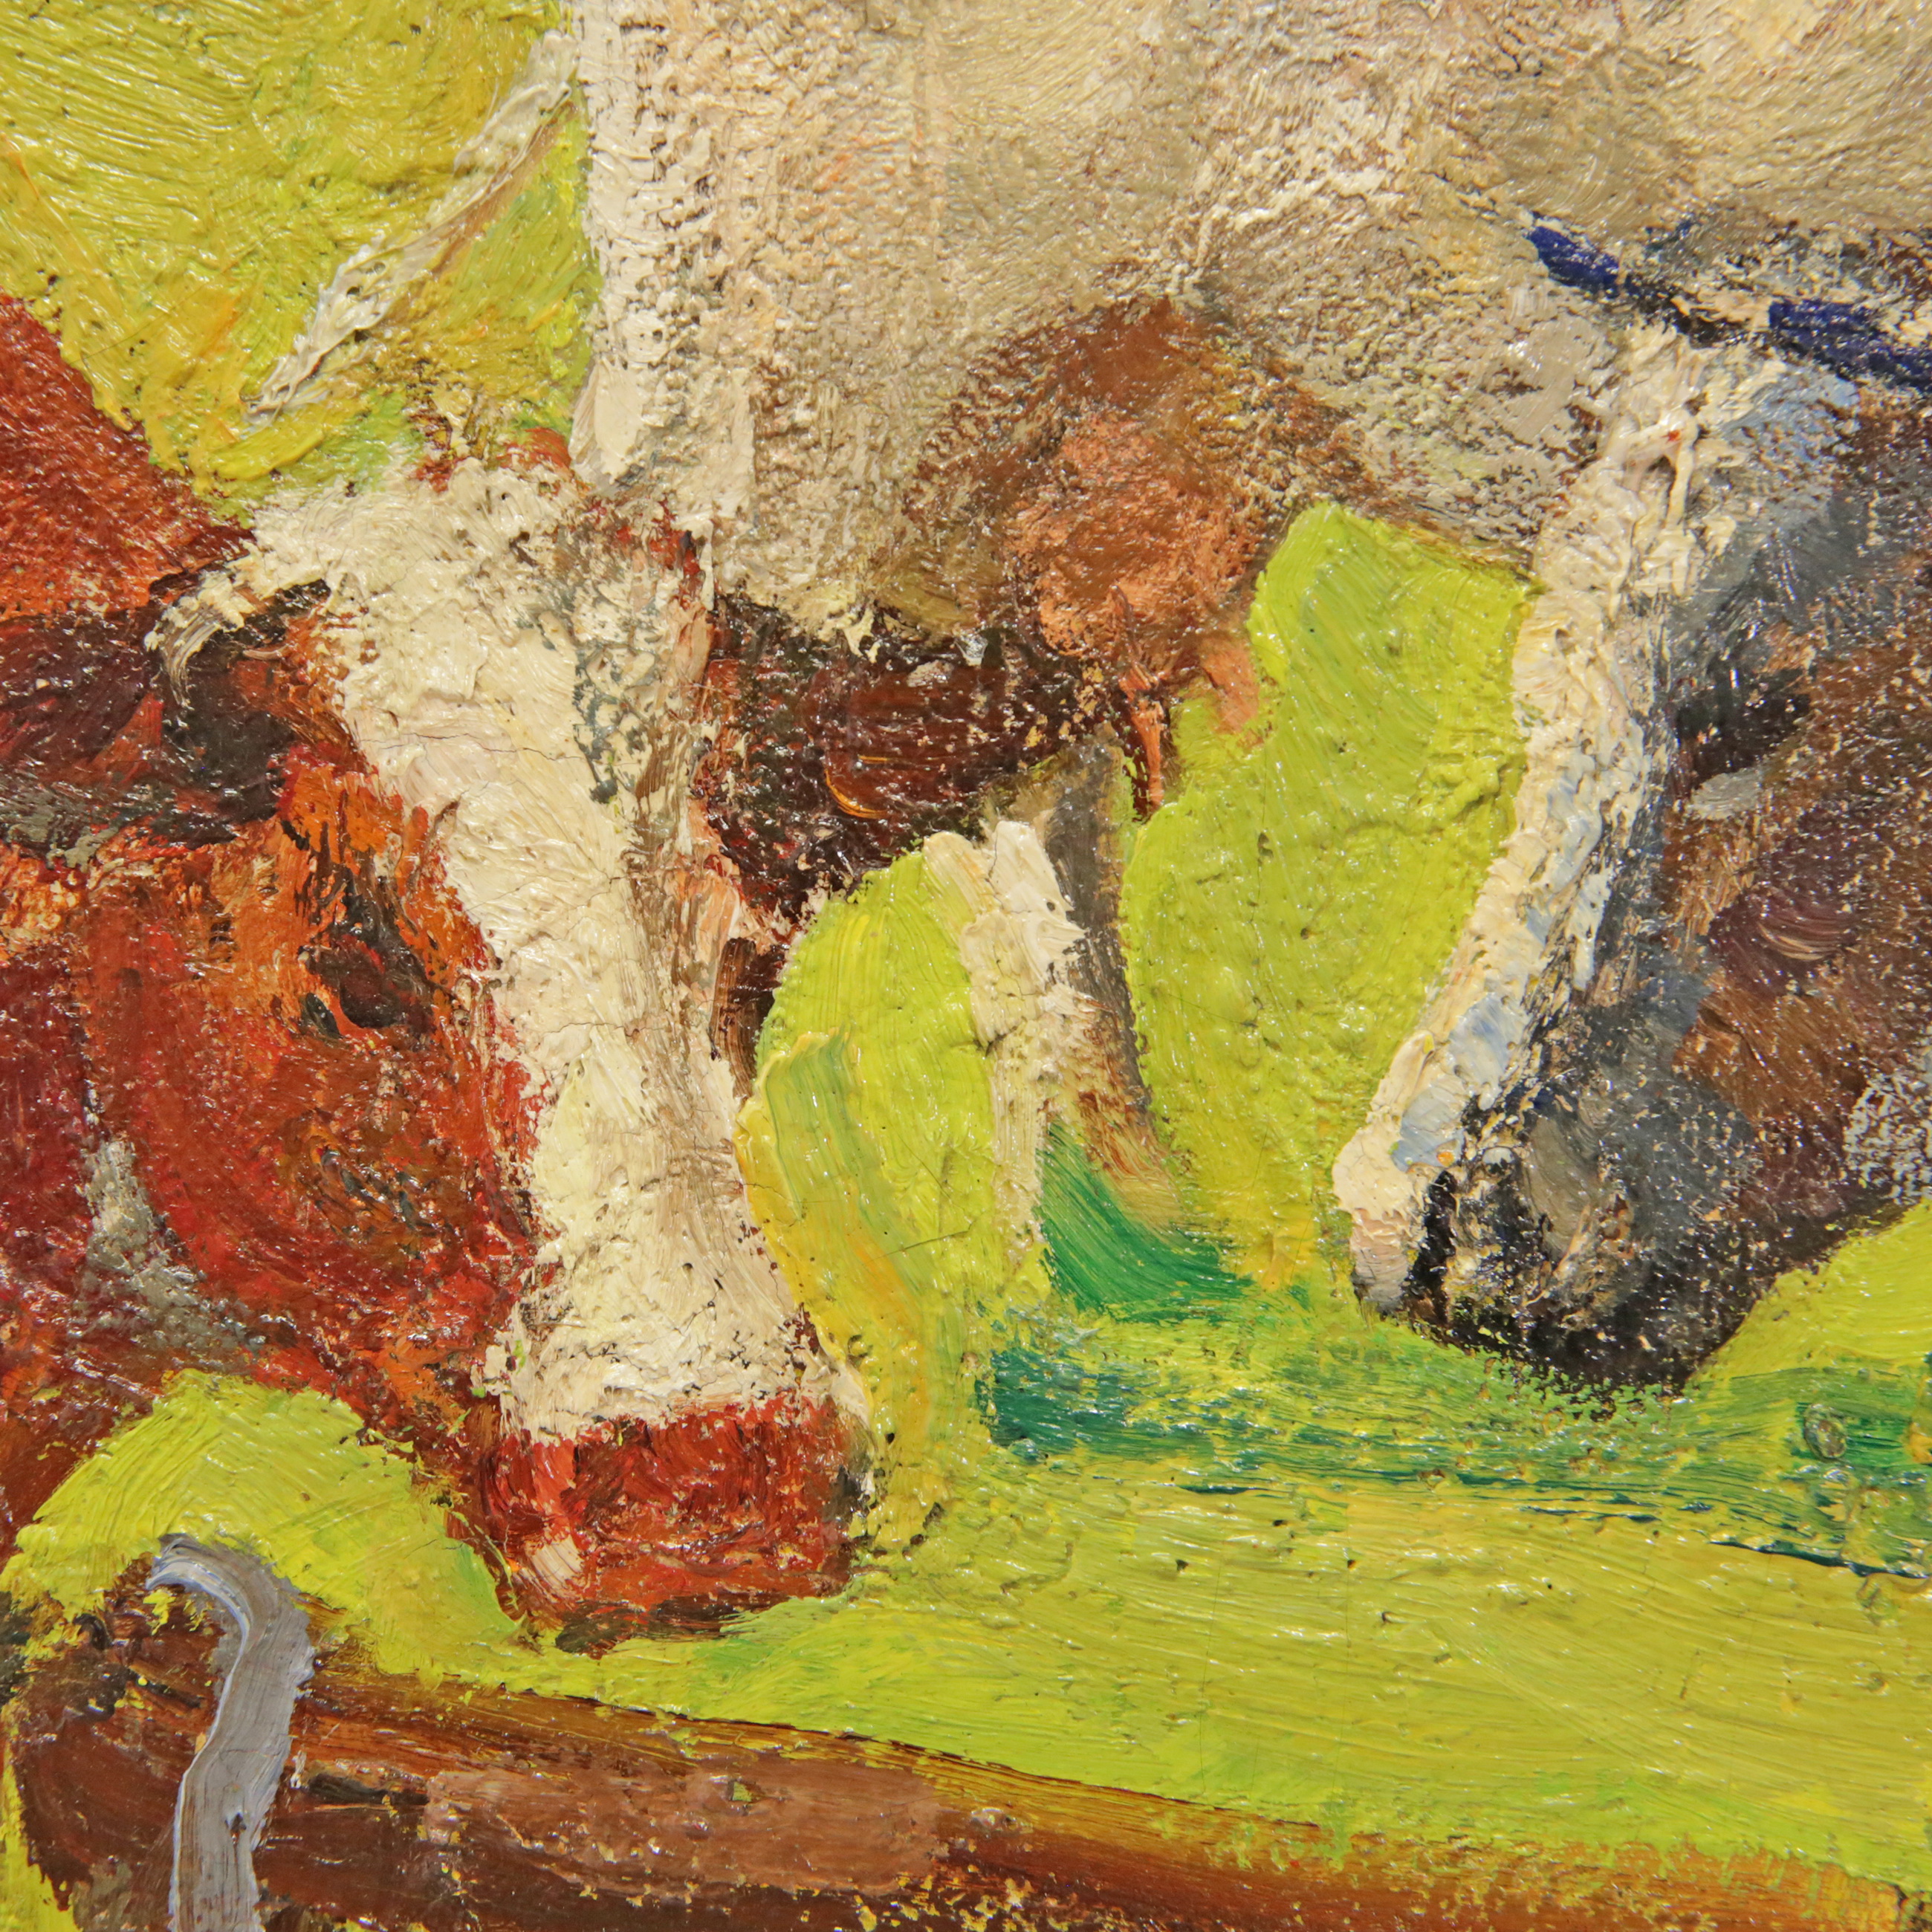 "Cows", oil on canvas, artist"s signature is illegible. French painting of the 20th century. - Image 2 of 4